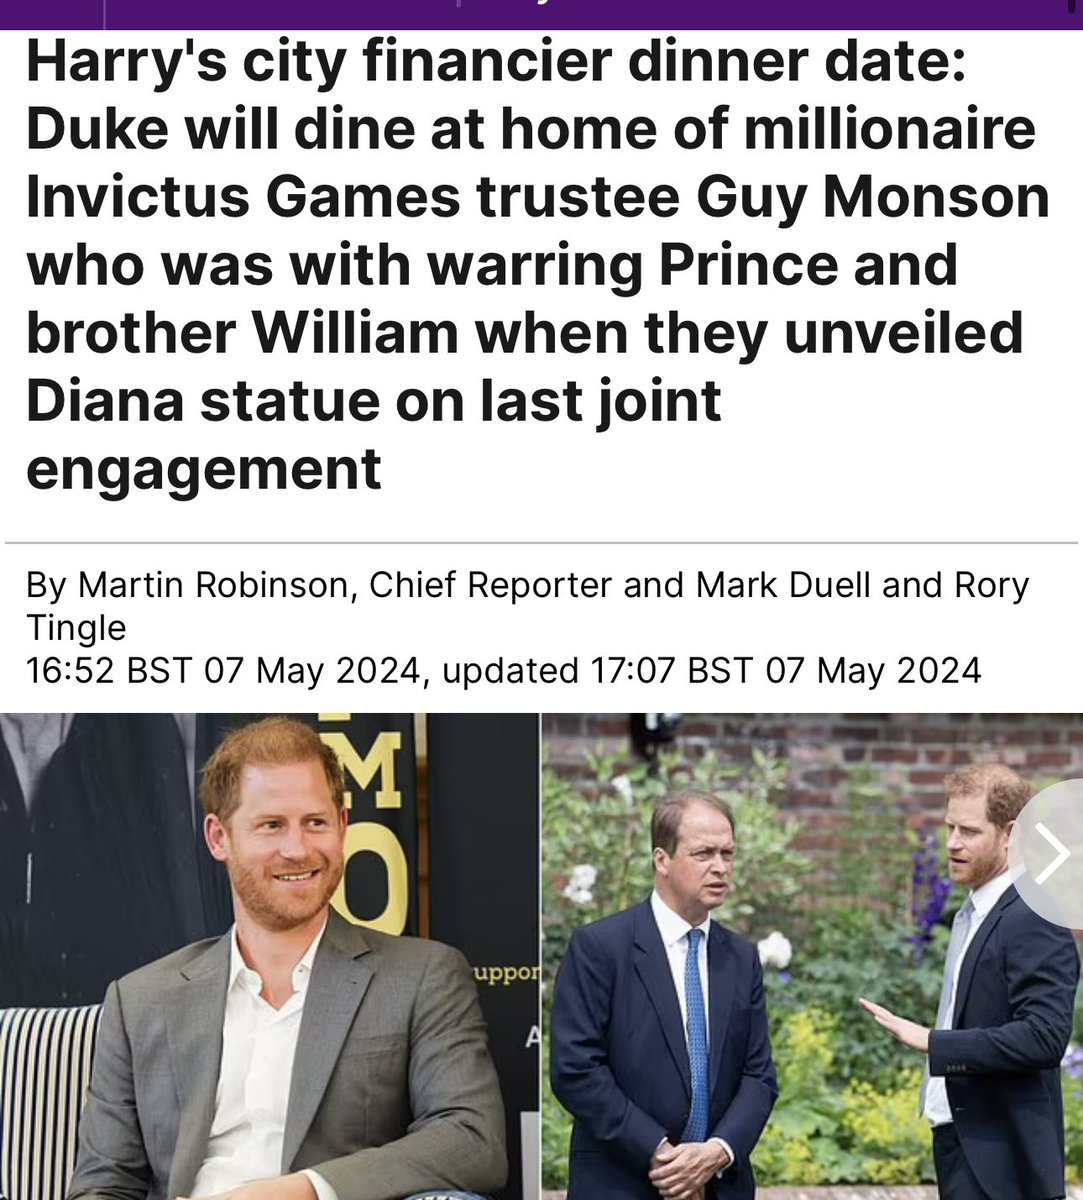 EMBARRASSING! 😳 

The U.K. Press are starving 4 content! 🤣

#PrinceHarry merely mentioned that he’ll be having dinner tonight w/one of  the #InvictusGames trustees. Ya’ll, why did the #ToxicBritishPress turn that into an ENTIRE article for clicks & views?! LOL 😂